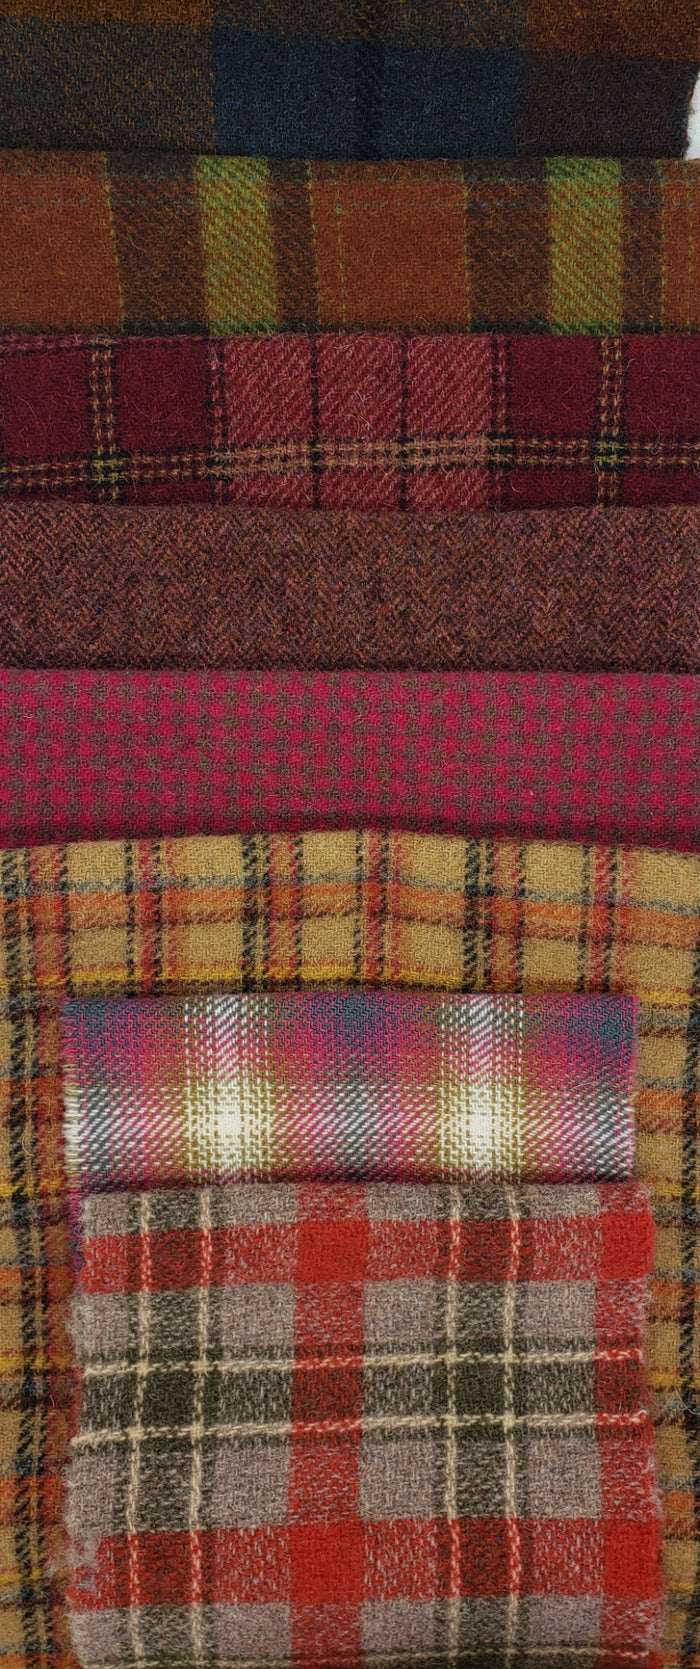 WOOL CLOTH MISC PLAIDS & TEXTURES GRAB BAG RSS309 - Wool Bundle of Assorted Shades of RED Fabrics - 7.0 ounces - 100% Wool for Rug Hooking & Wool Applique OOAK